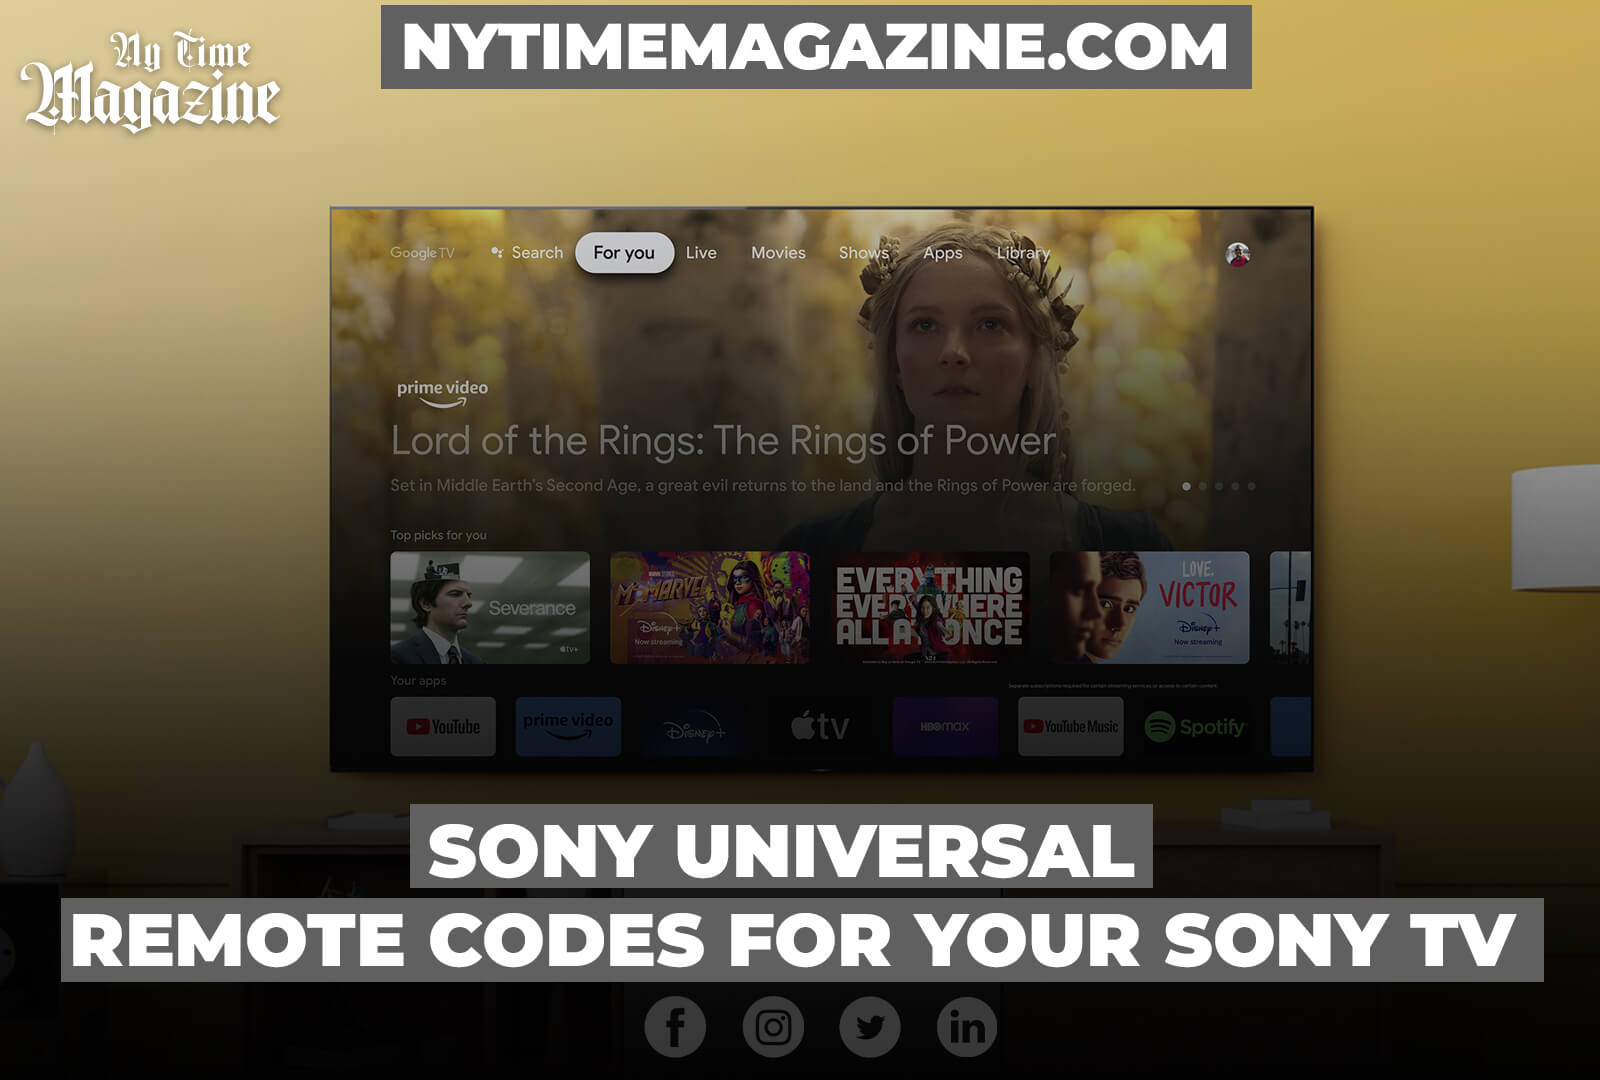 SONY UNIVERSAL REMOTE CODES FOR YOUR SONY TV